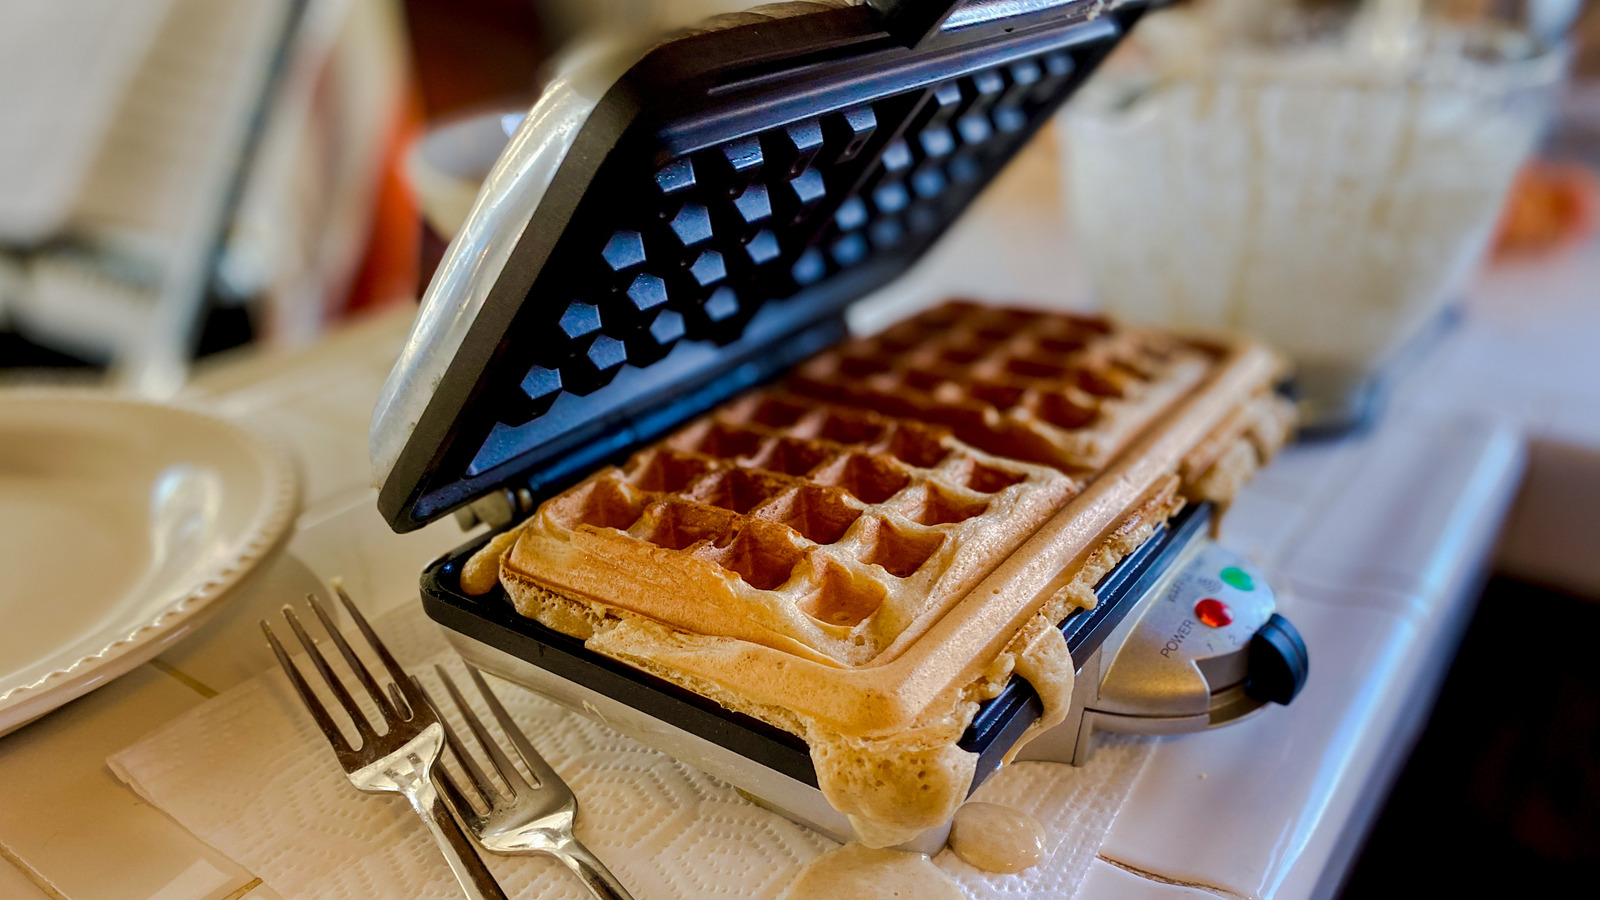 https://www.tastingtable.com/img/gallery/how-cooking-oil-will-help-clean-caked-on-bits-from-your-waffle-maker/l-intro-1692980506.jpg